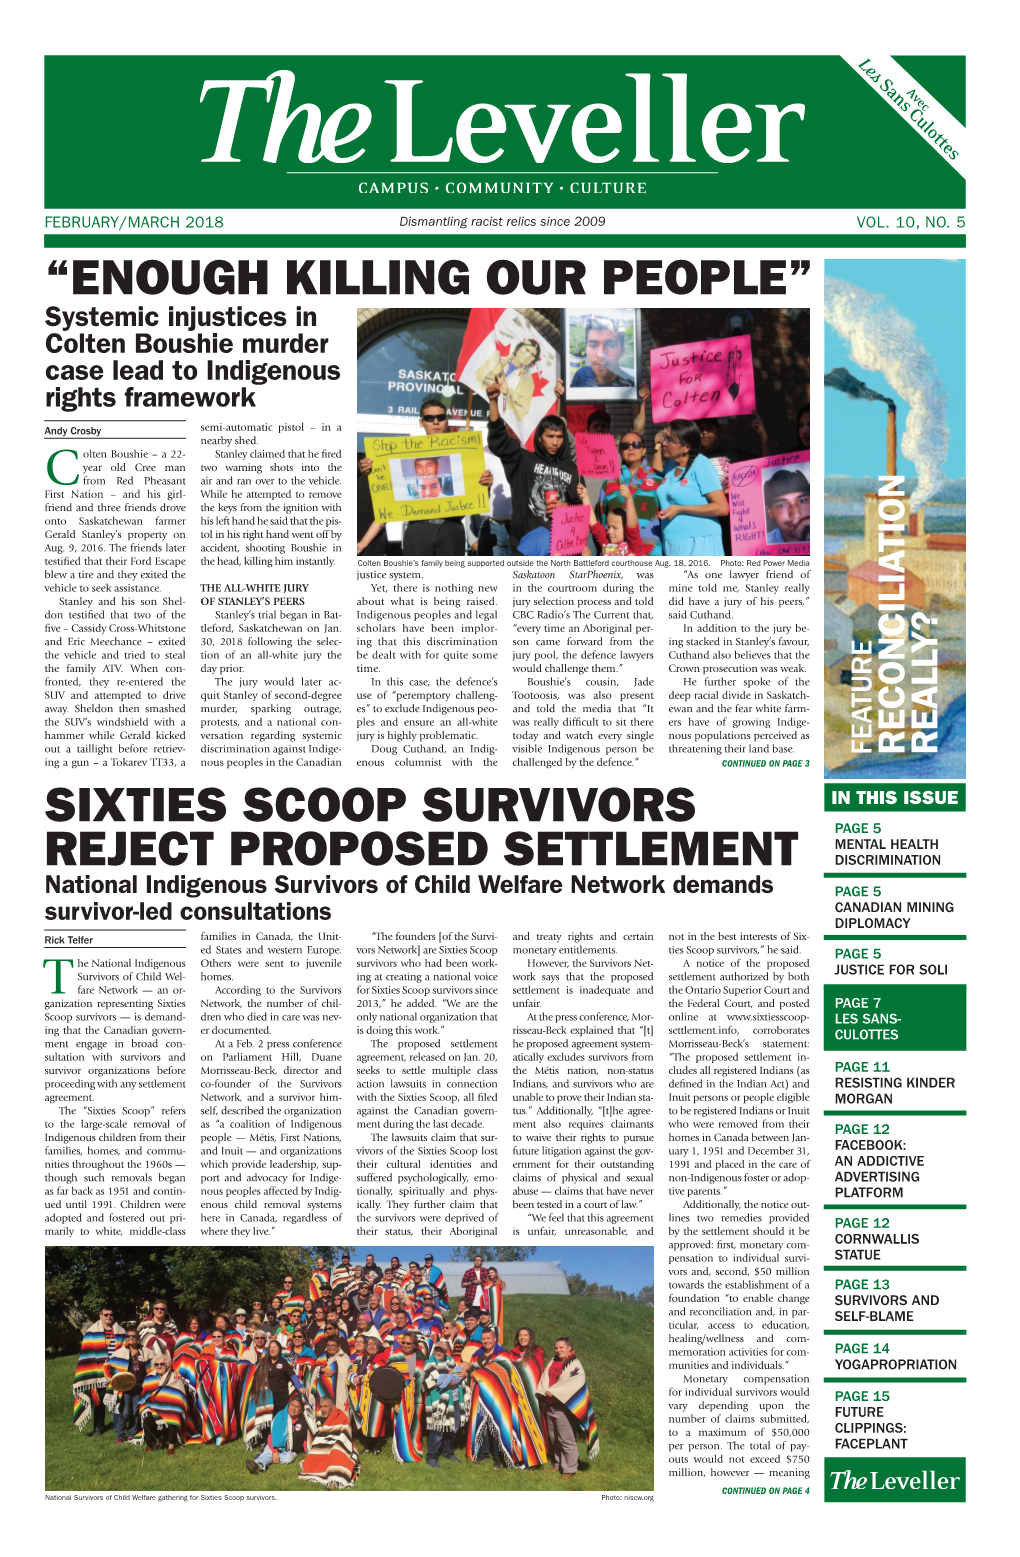 Sixties Scoop Survivors Reject Proposed Settlement Page 5